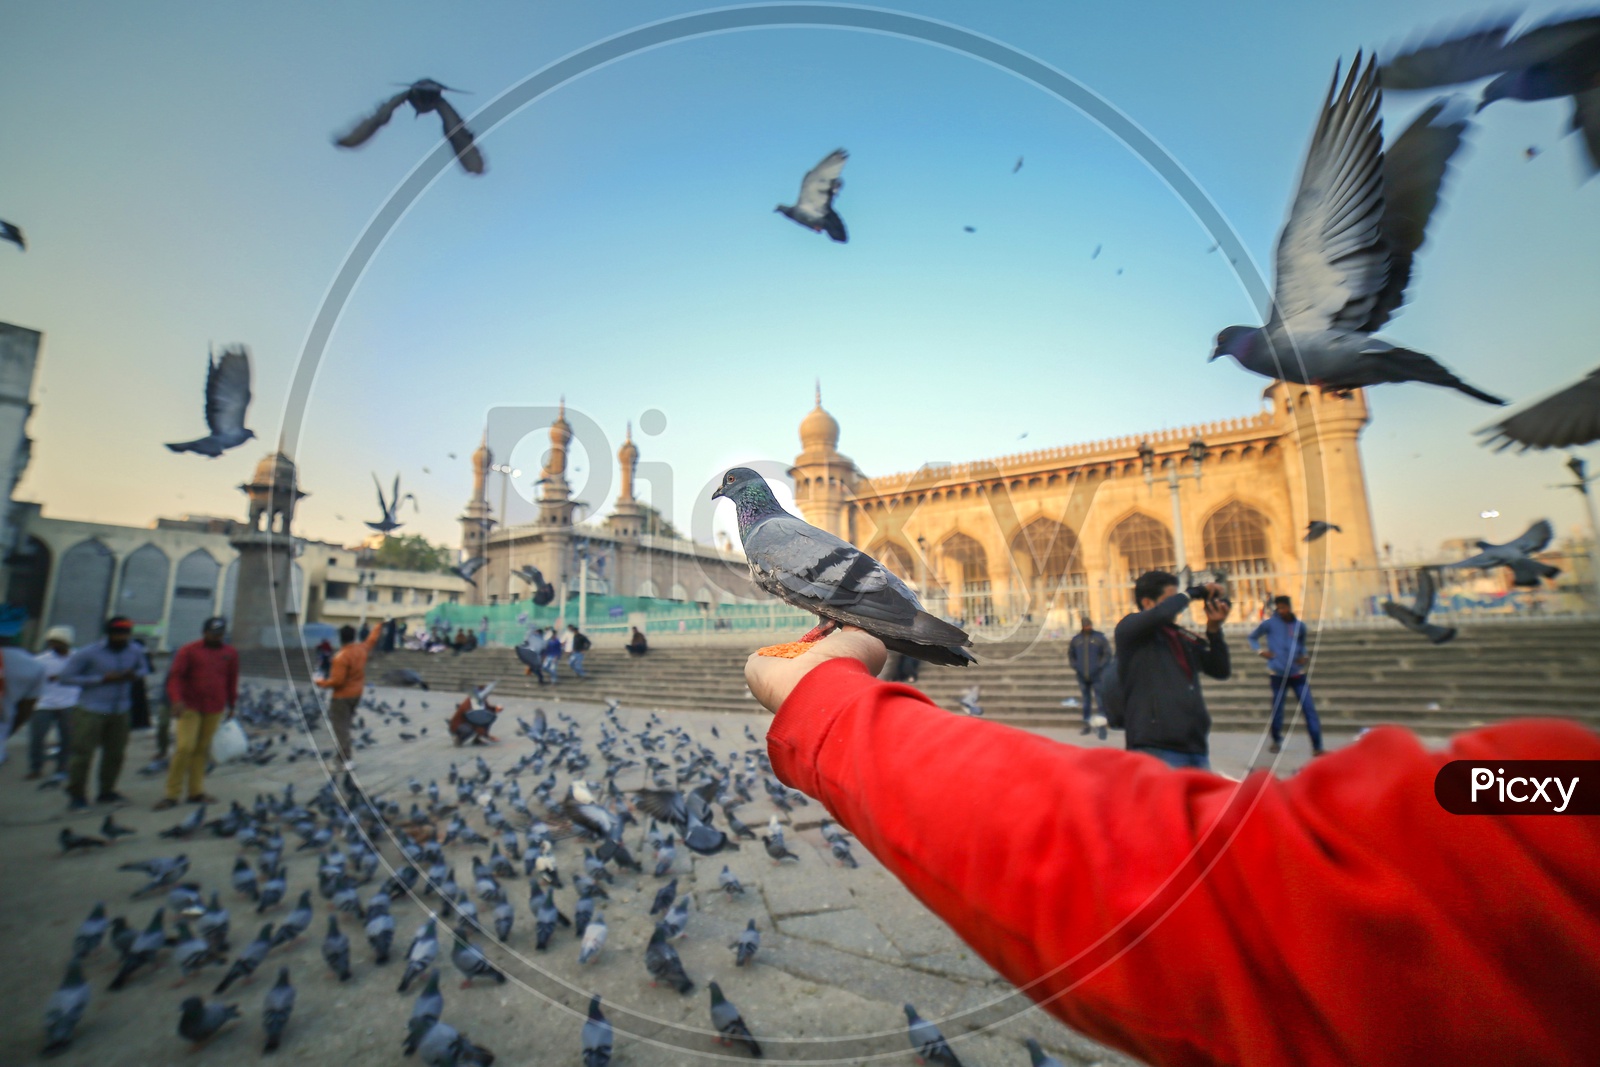 A Woman  Feeding Pigeon With Grains In Hand At Mecca Masjidh